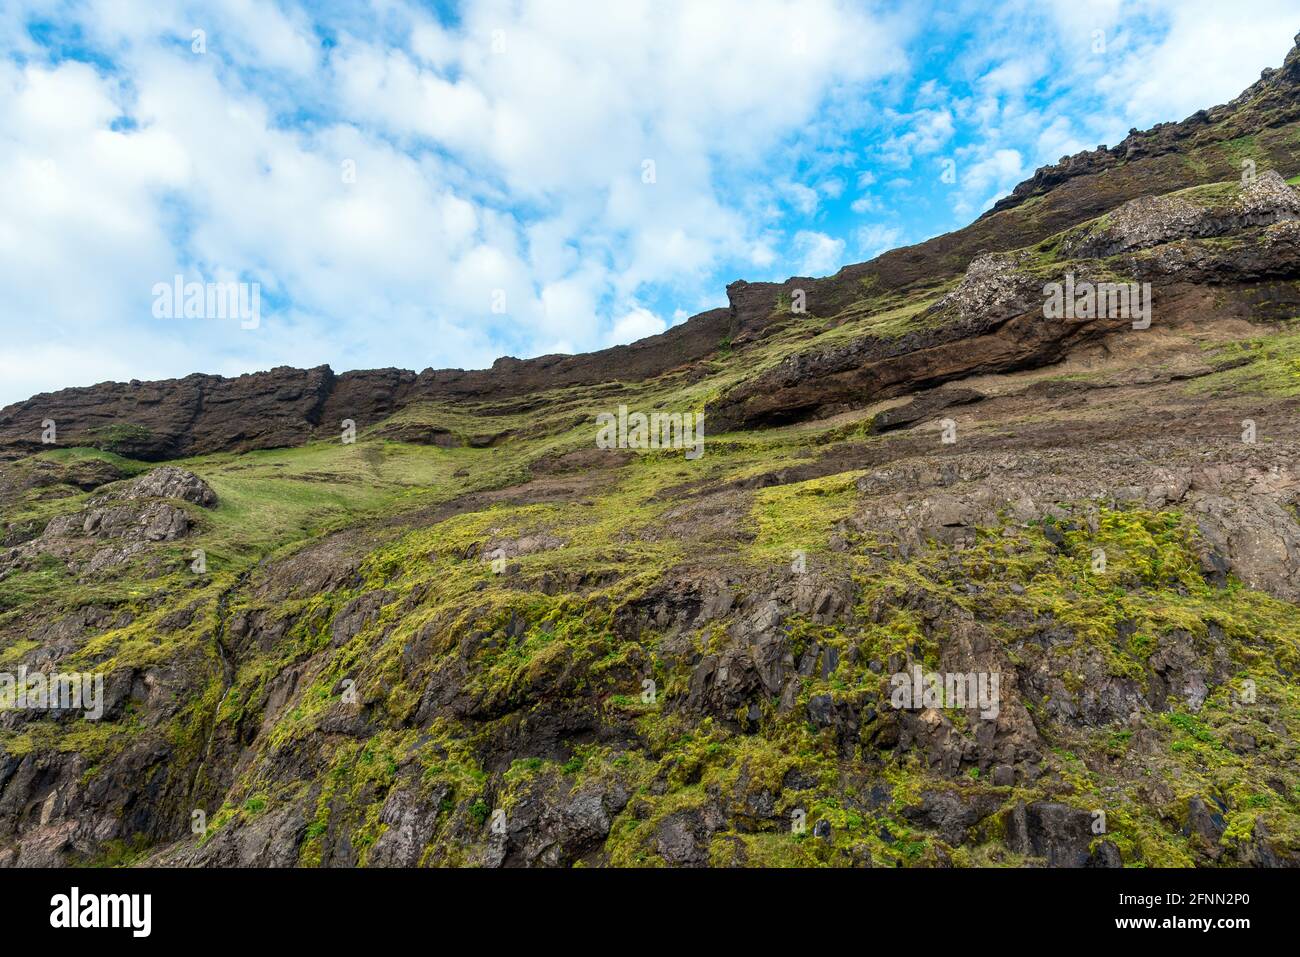 Low angle view of a steep grassy cliff under blue sky with clouds. Natural background. Stock Photo